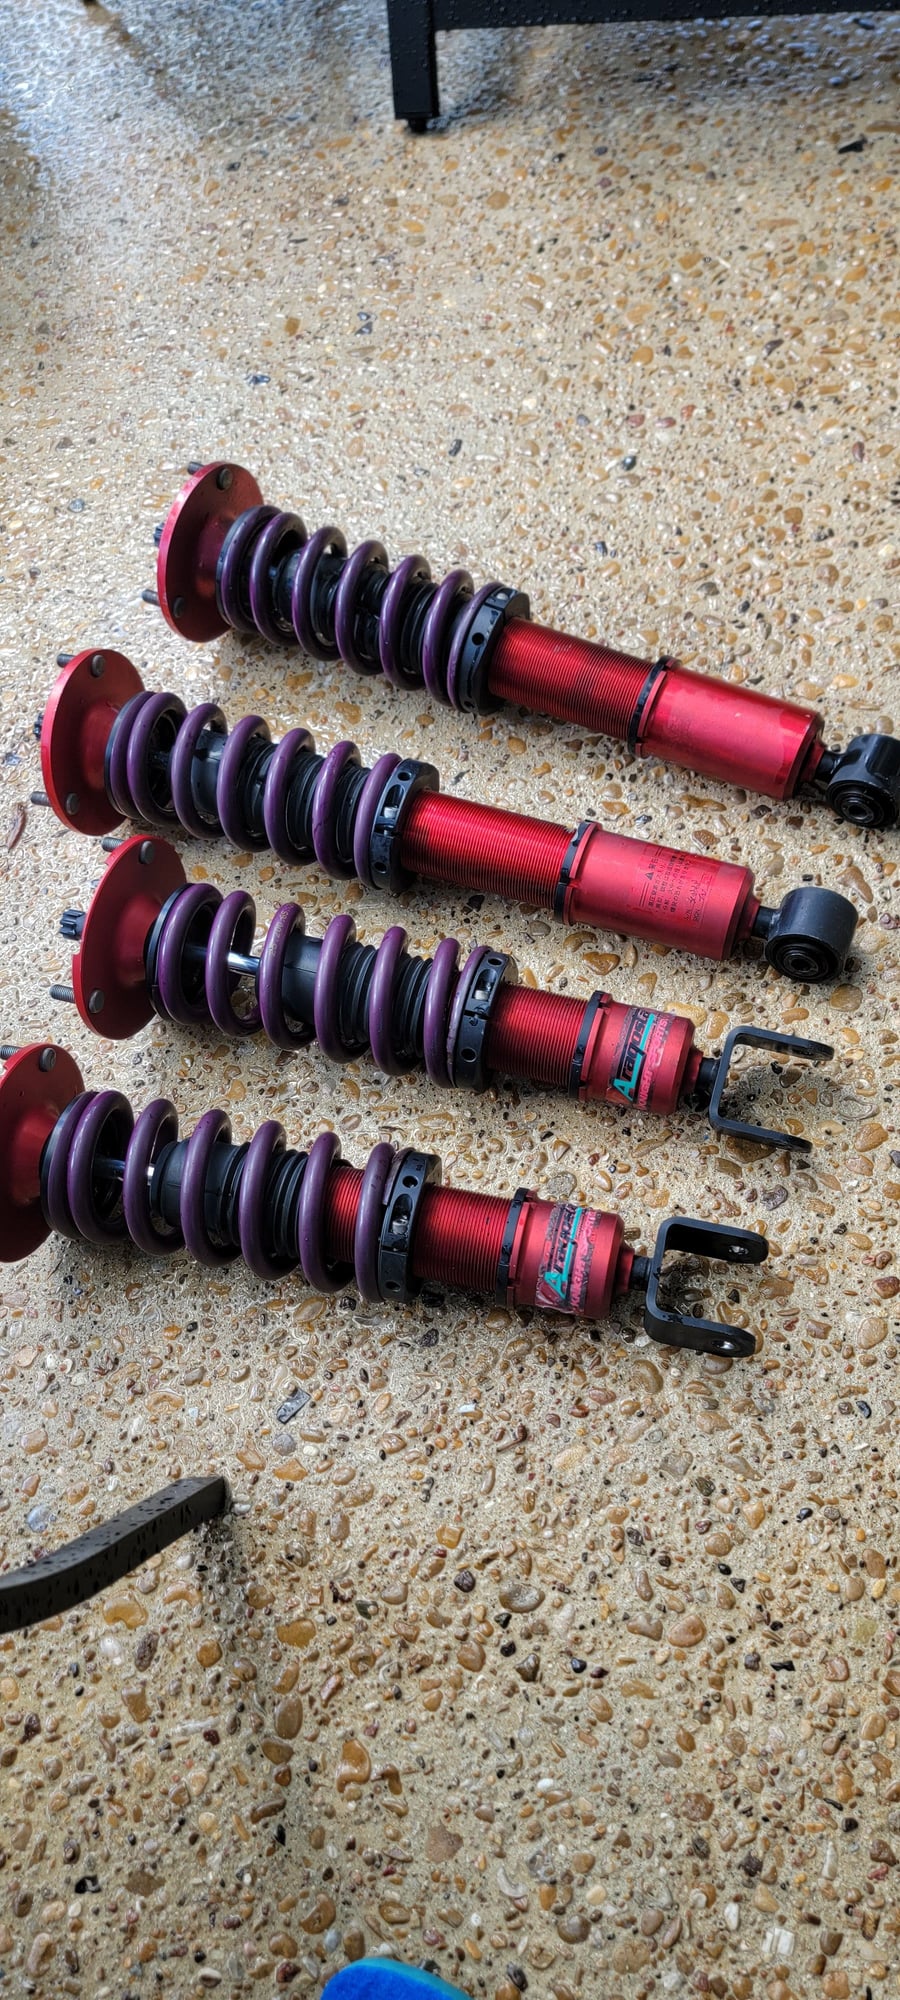 Steering/Suspension - Knight Sports Aragosta coilovers - Used - 1992 to 2002 Mazda RX-7 - Arlington, TX 76001, United States